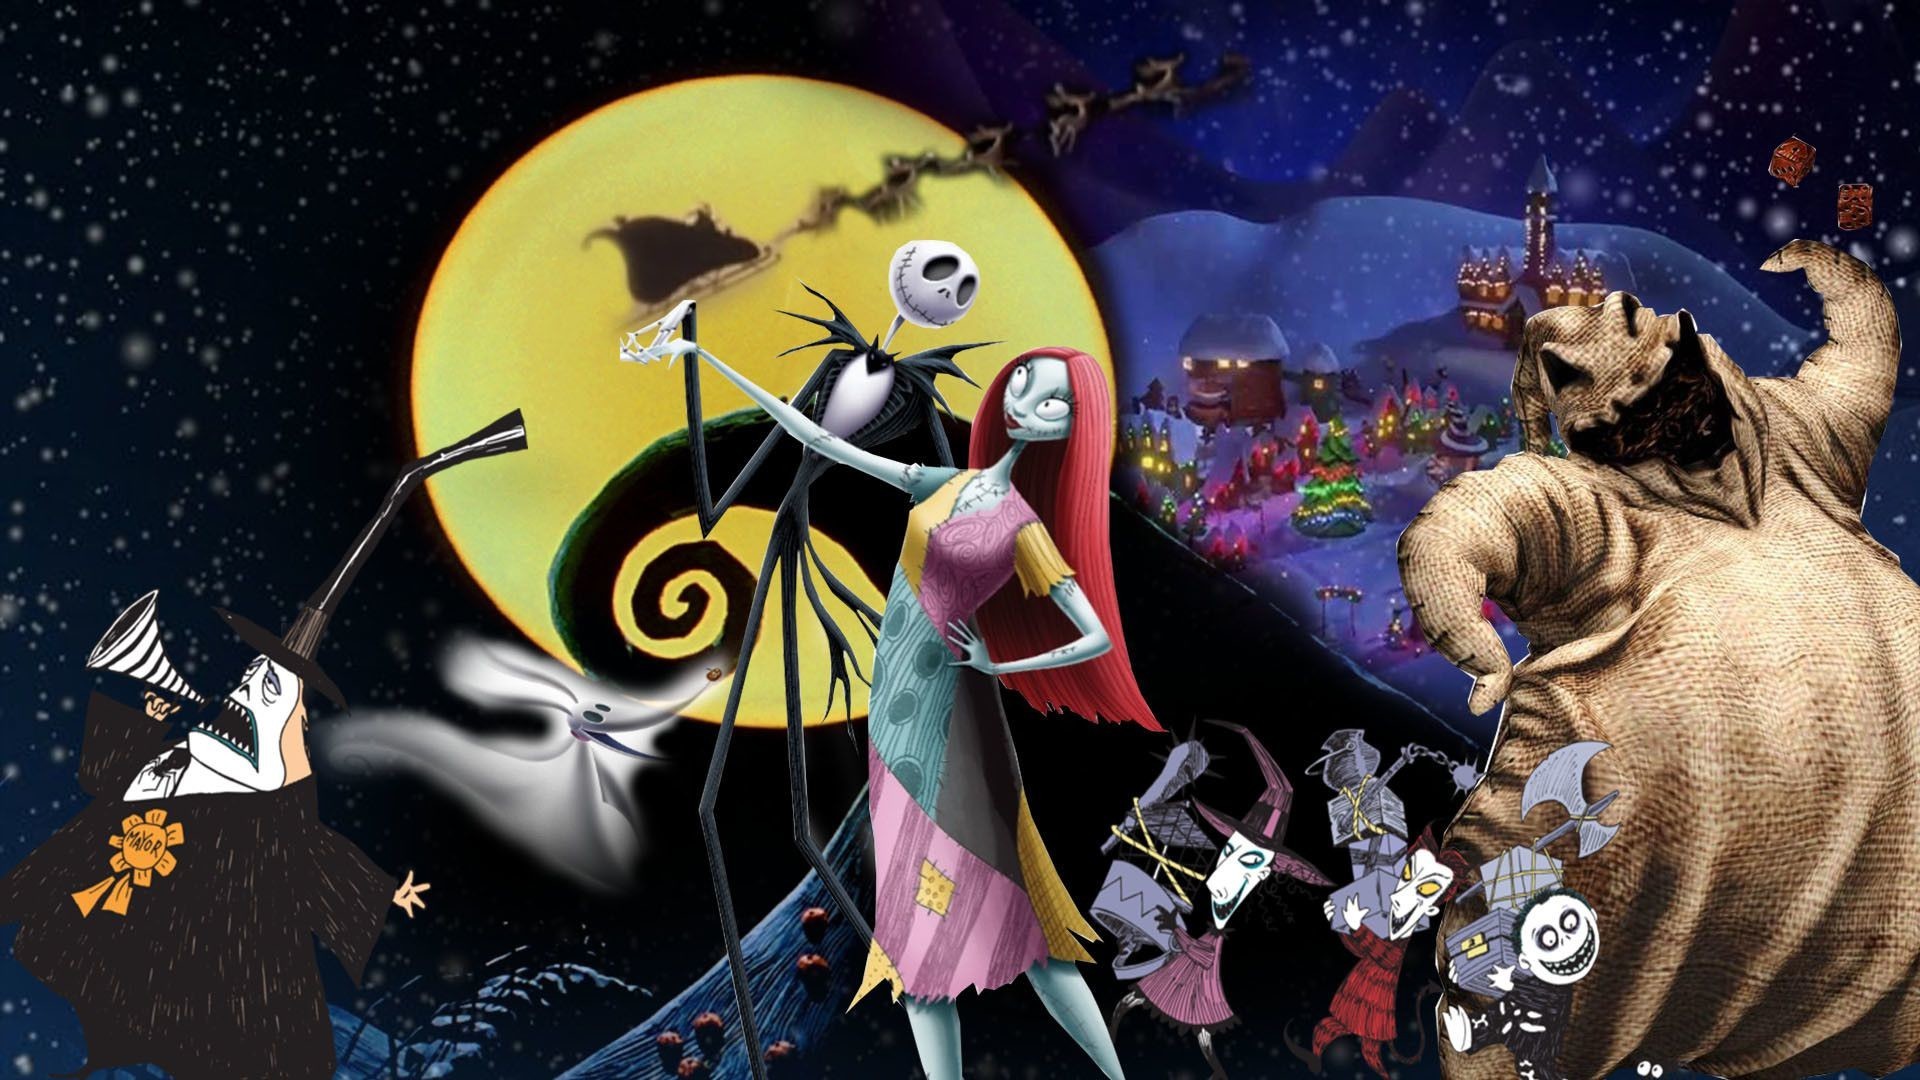 1920x1080  Nightmare Before Christmas Wallpapers HD - Wallpaper Cave